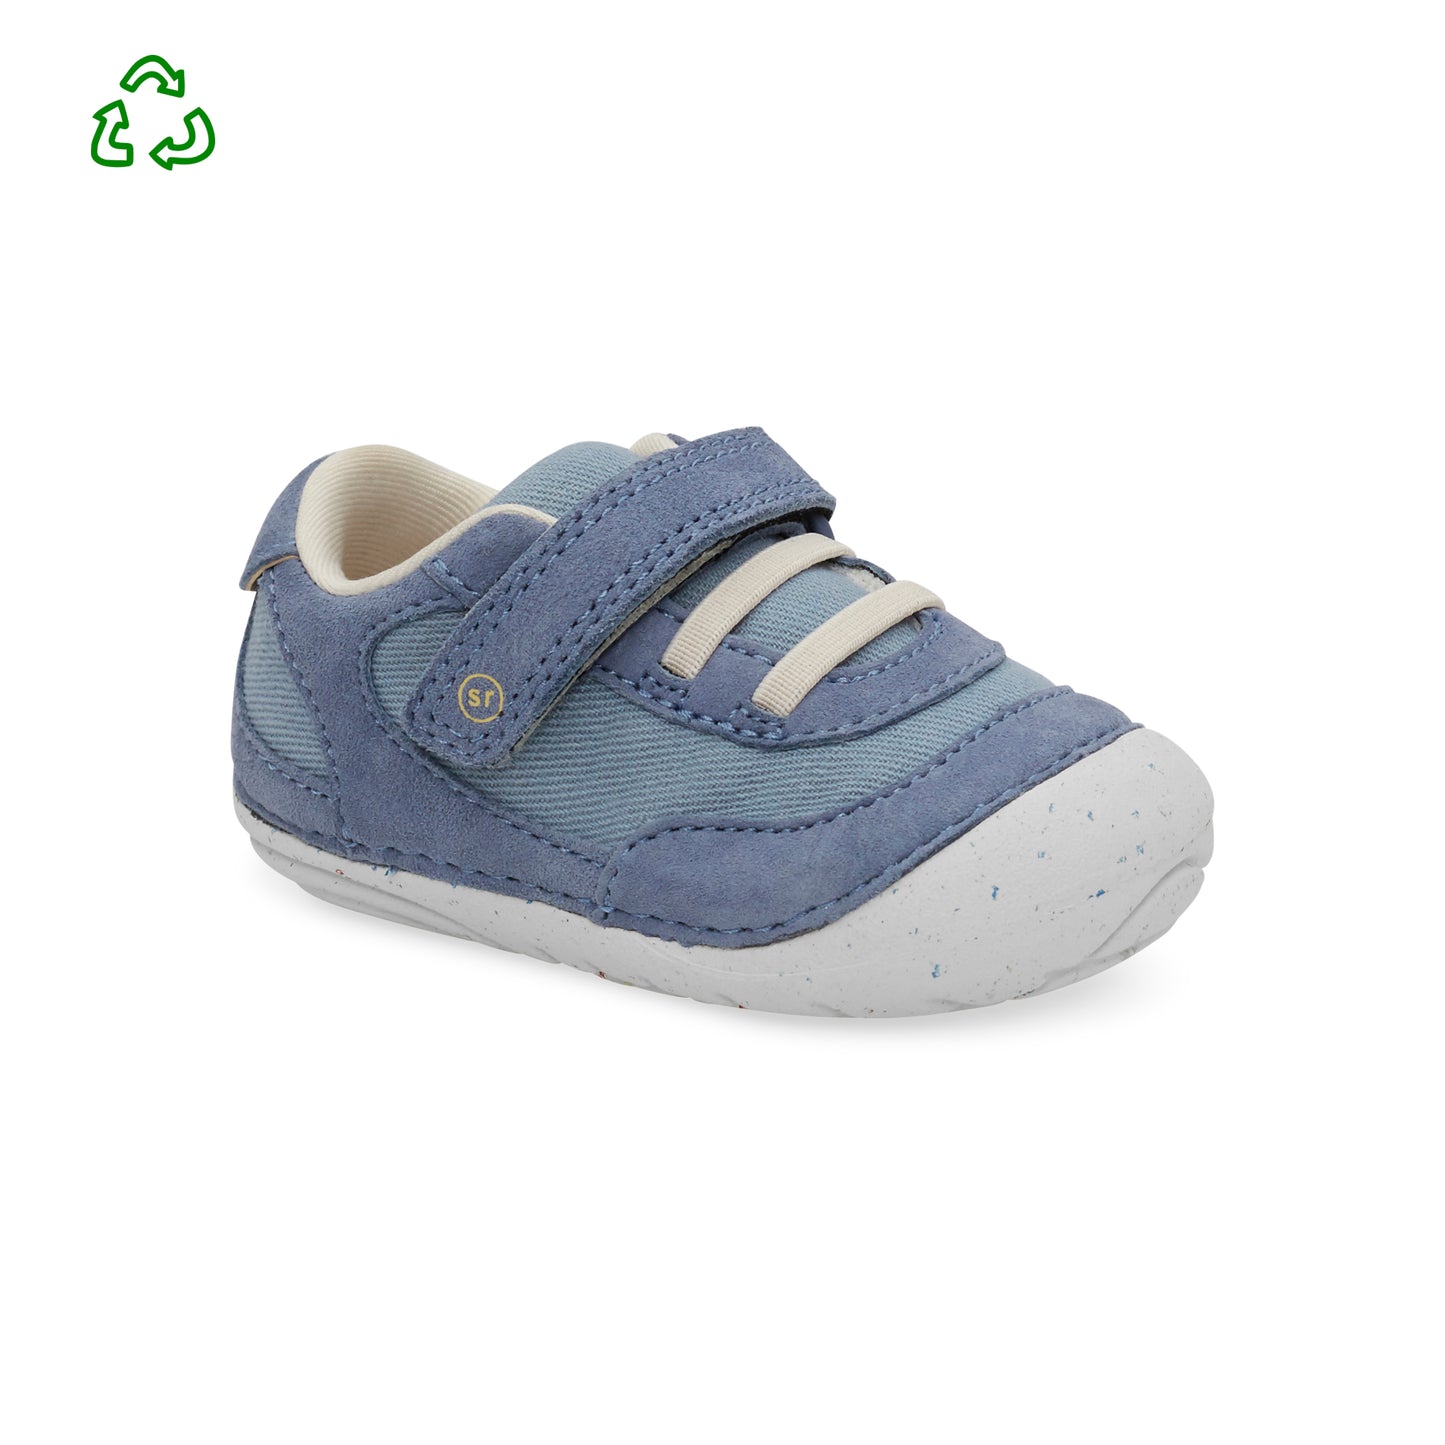 Sprout Sneaker Blue